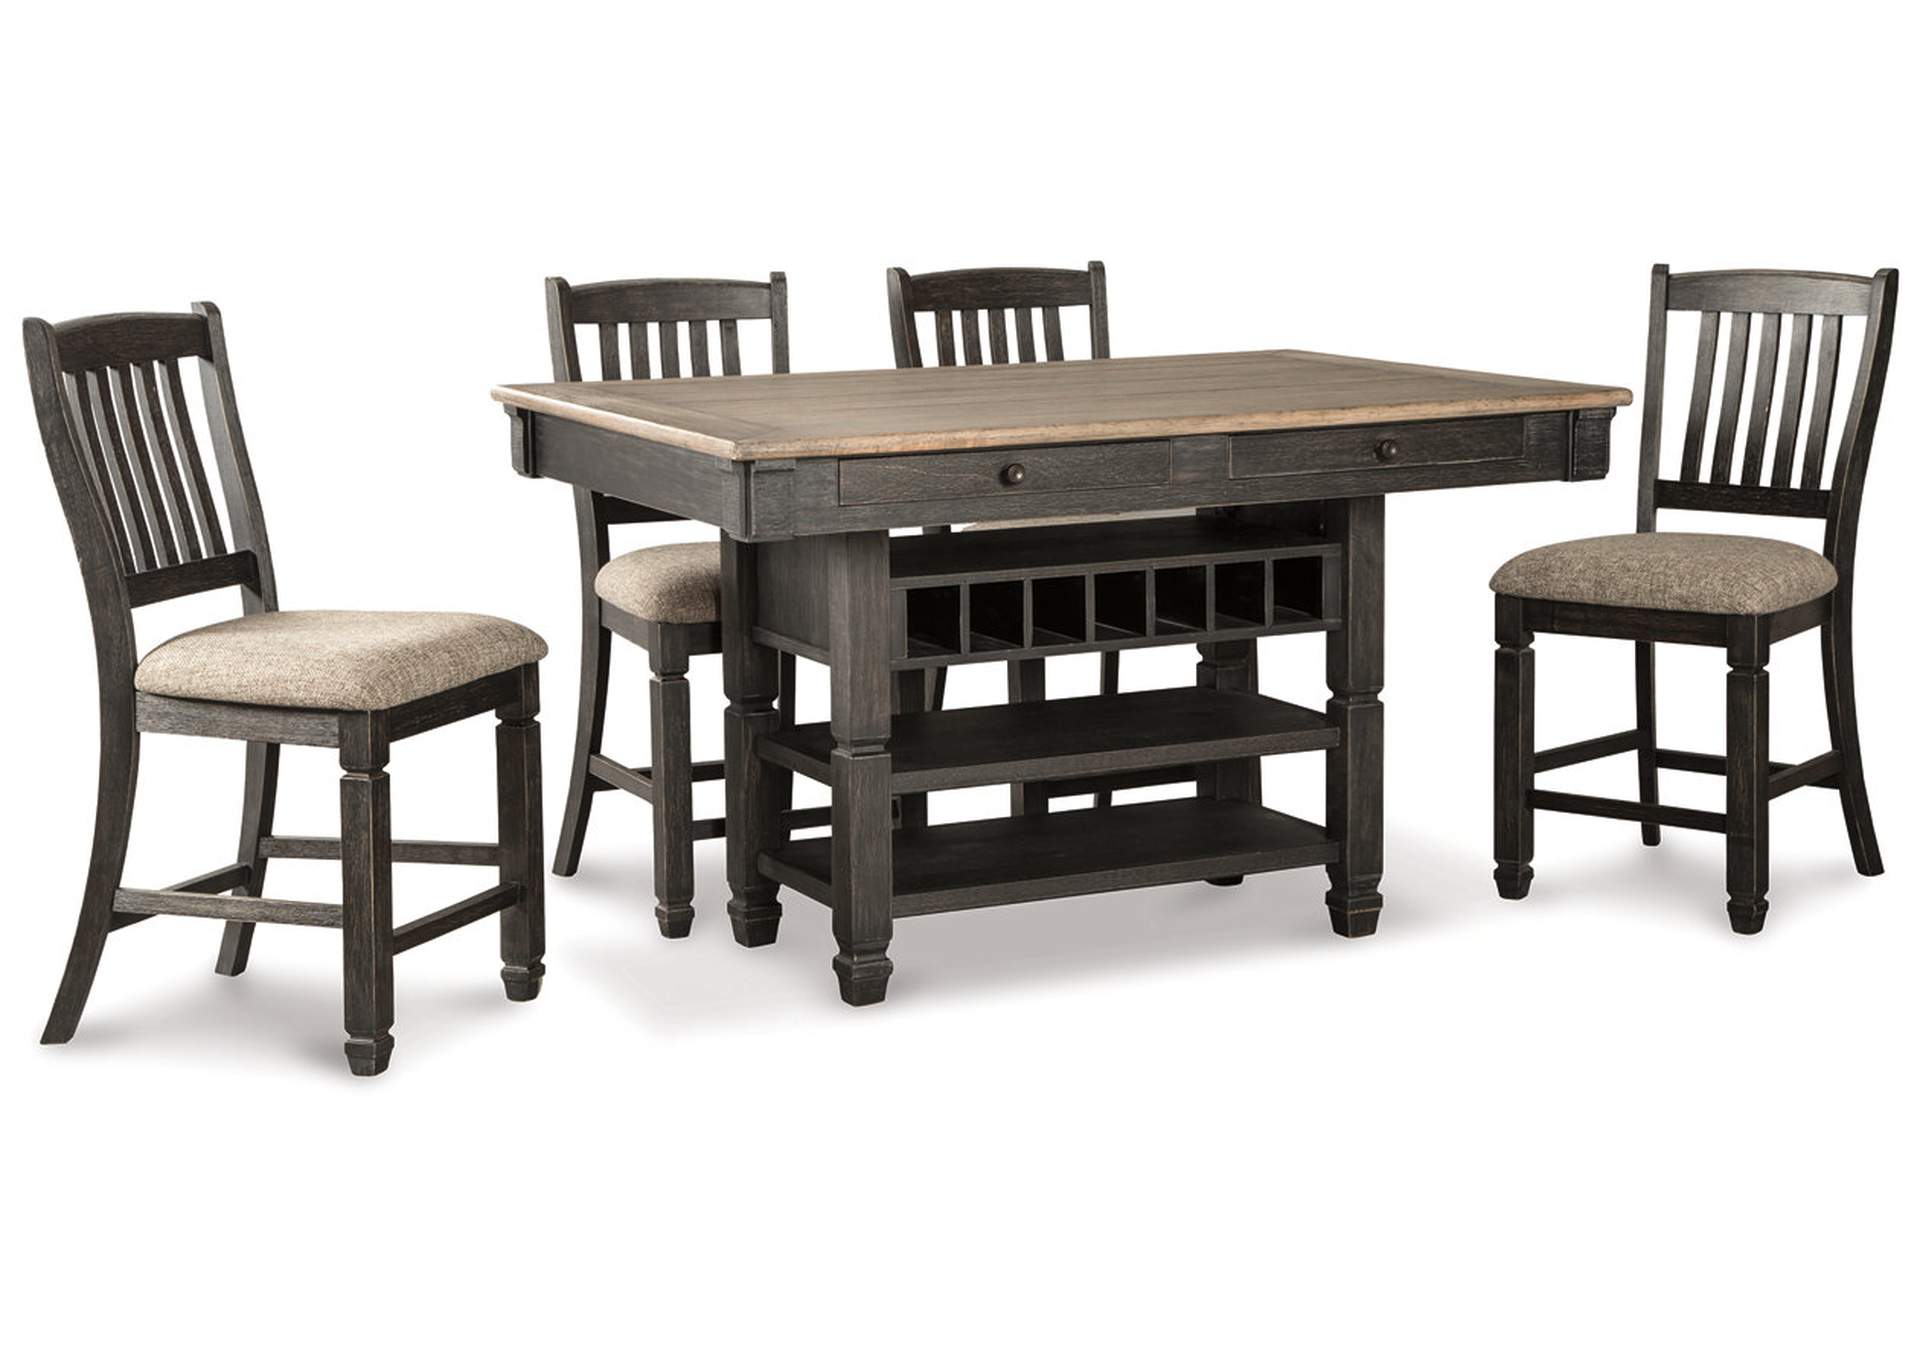 Tyler Creek Counter Height Dining Table with 4 Barstools,Signature Design By Ashley